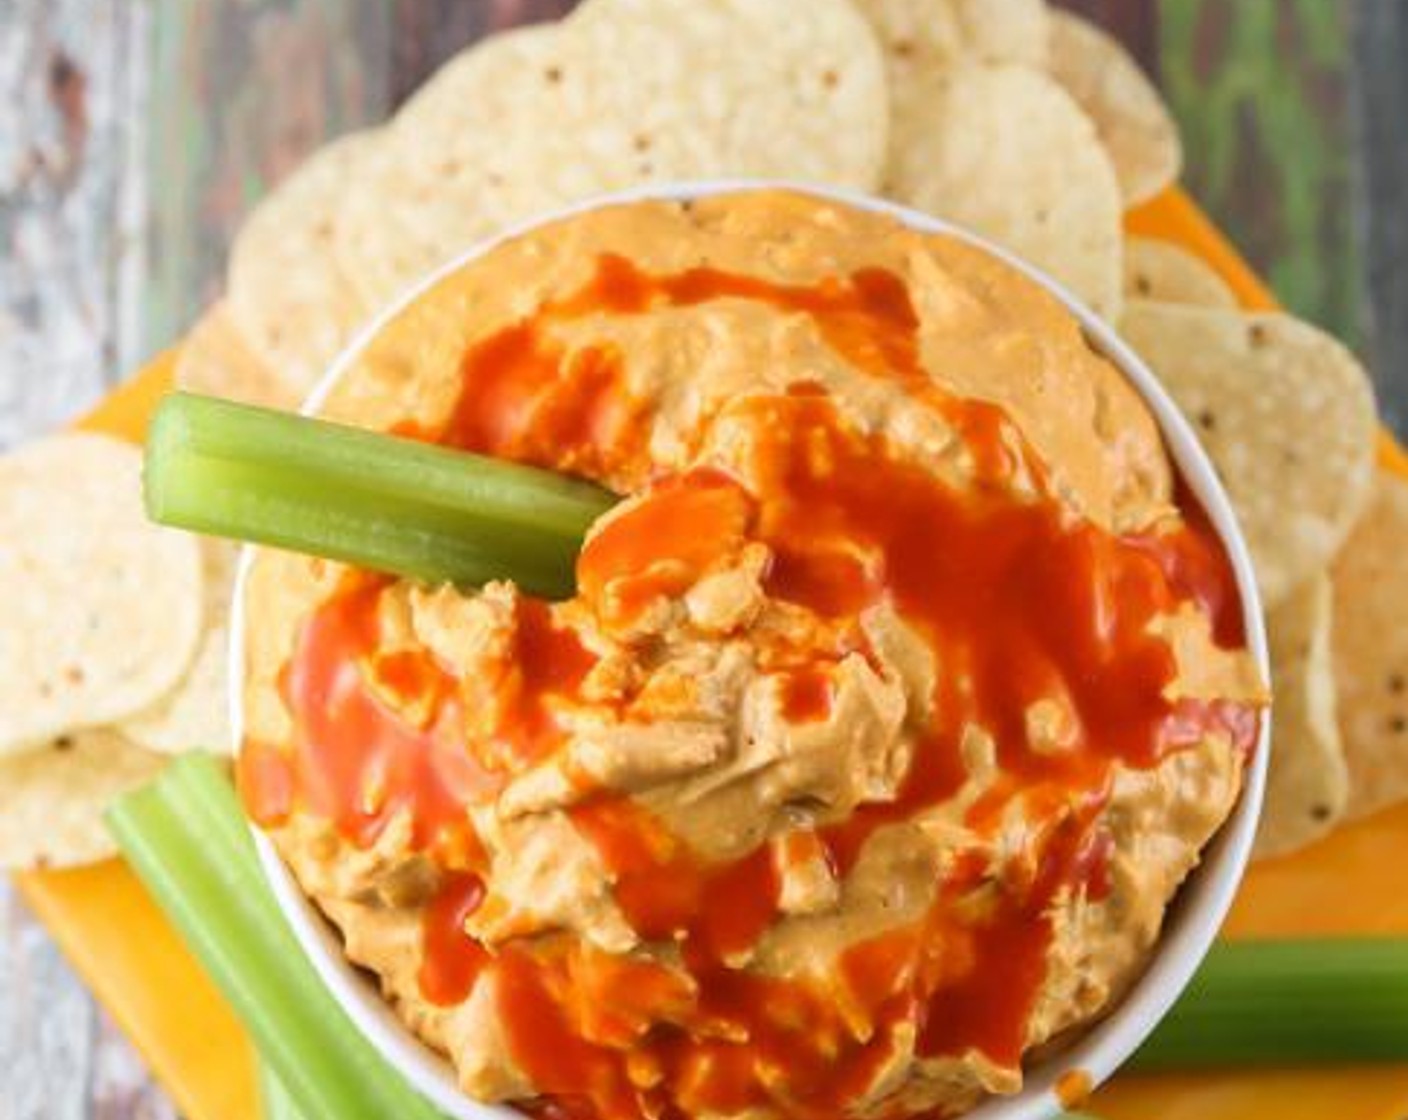 step 1 Combine the Chicken (2 cups), Cream Cheese (1 pckg), Shredded Mozzarella Cheese (1 cup), Ranch Dressing (3/4 cup), Buffalo Sauce (1 cup), and Blue Cheese (1 cup) in a crockpot. Cook on High heat for 2 hours, stirring occasionally, and serve with crackers and veggies.